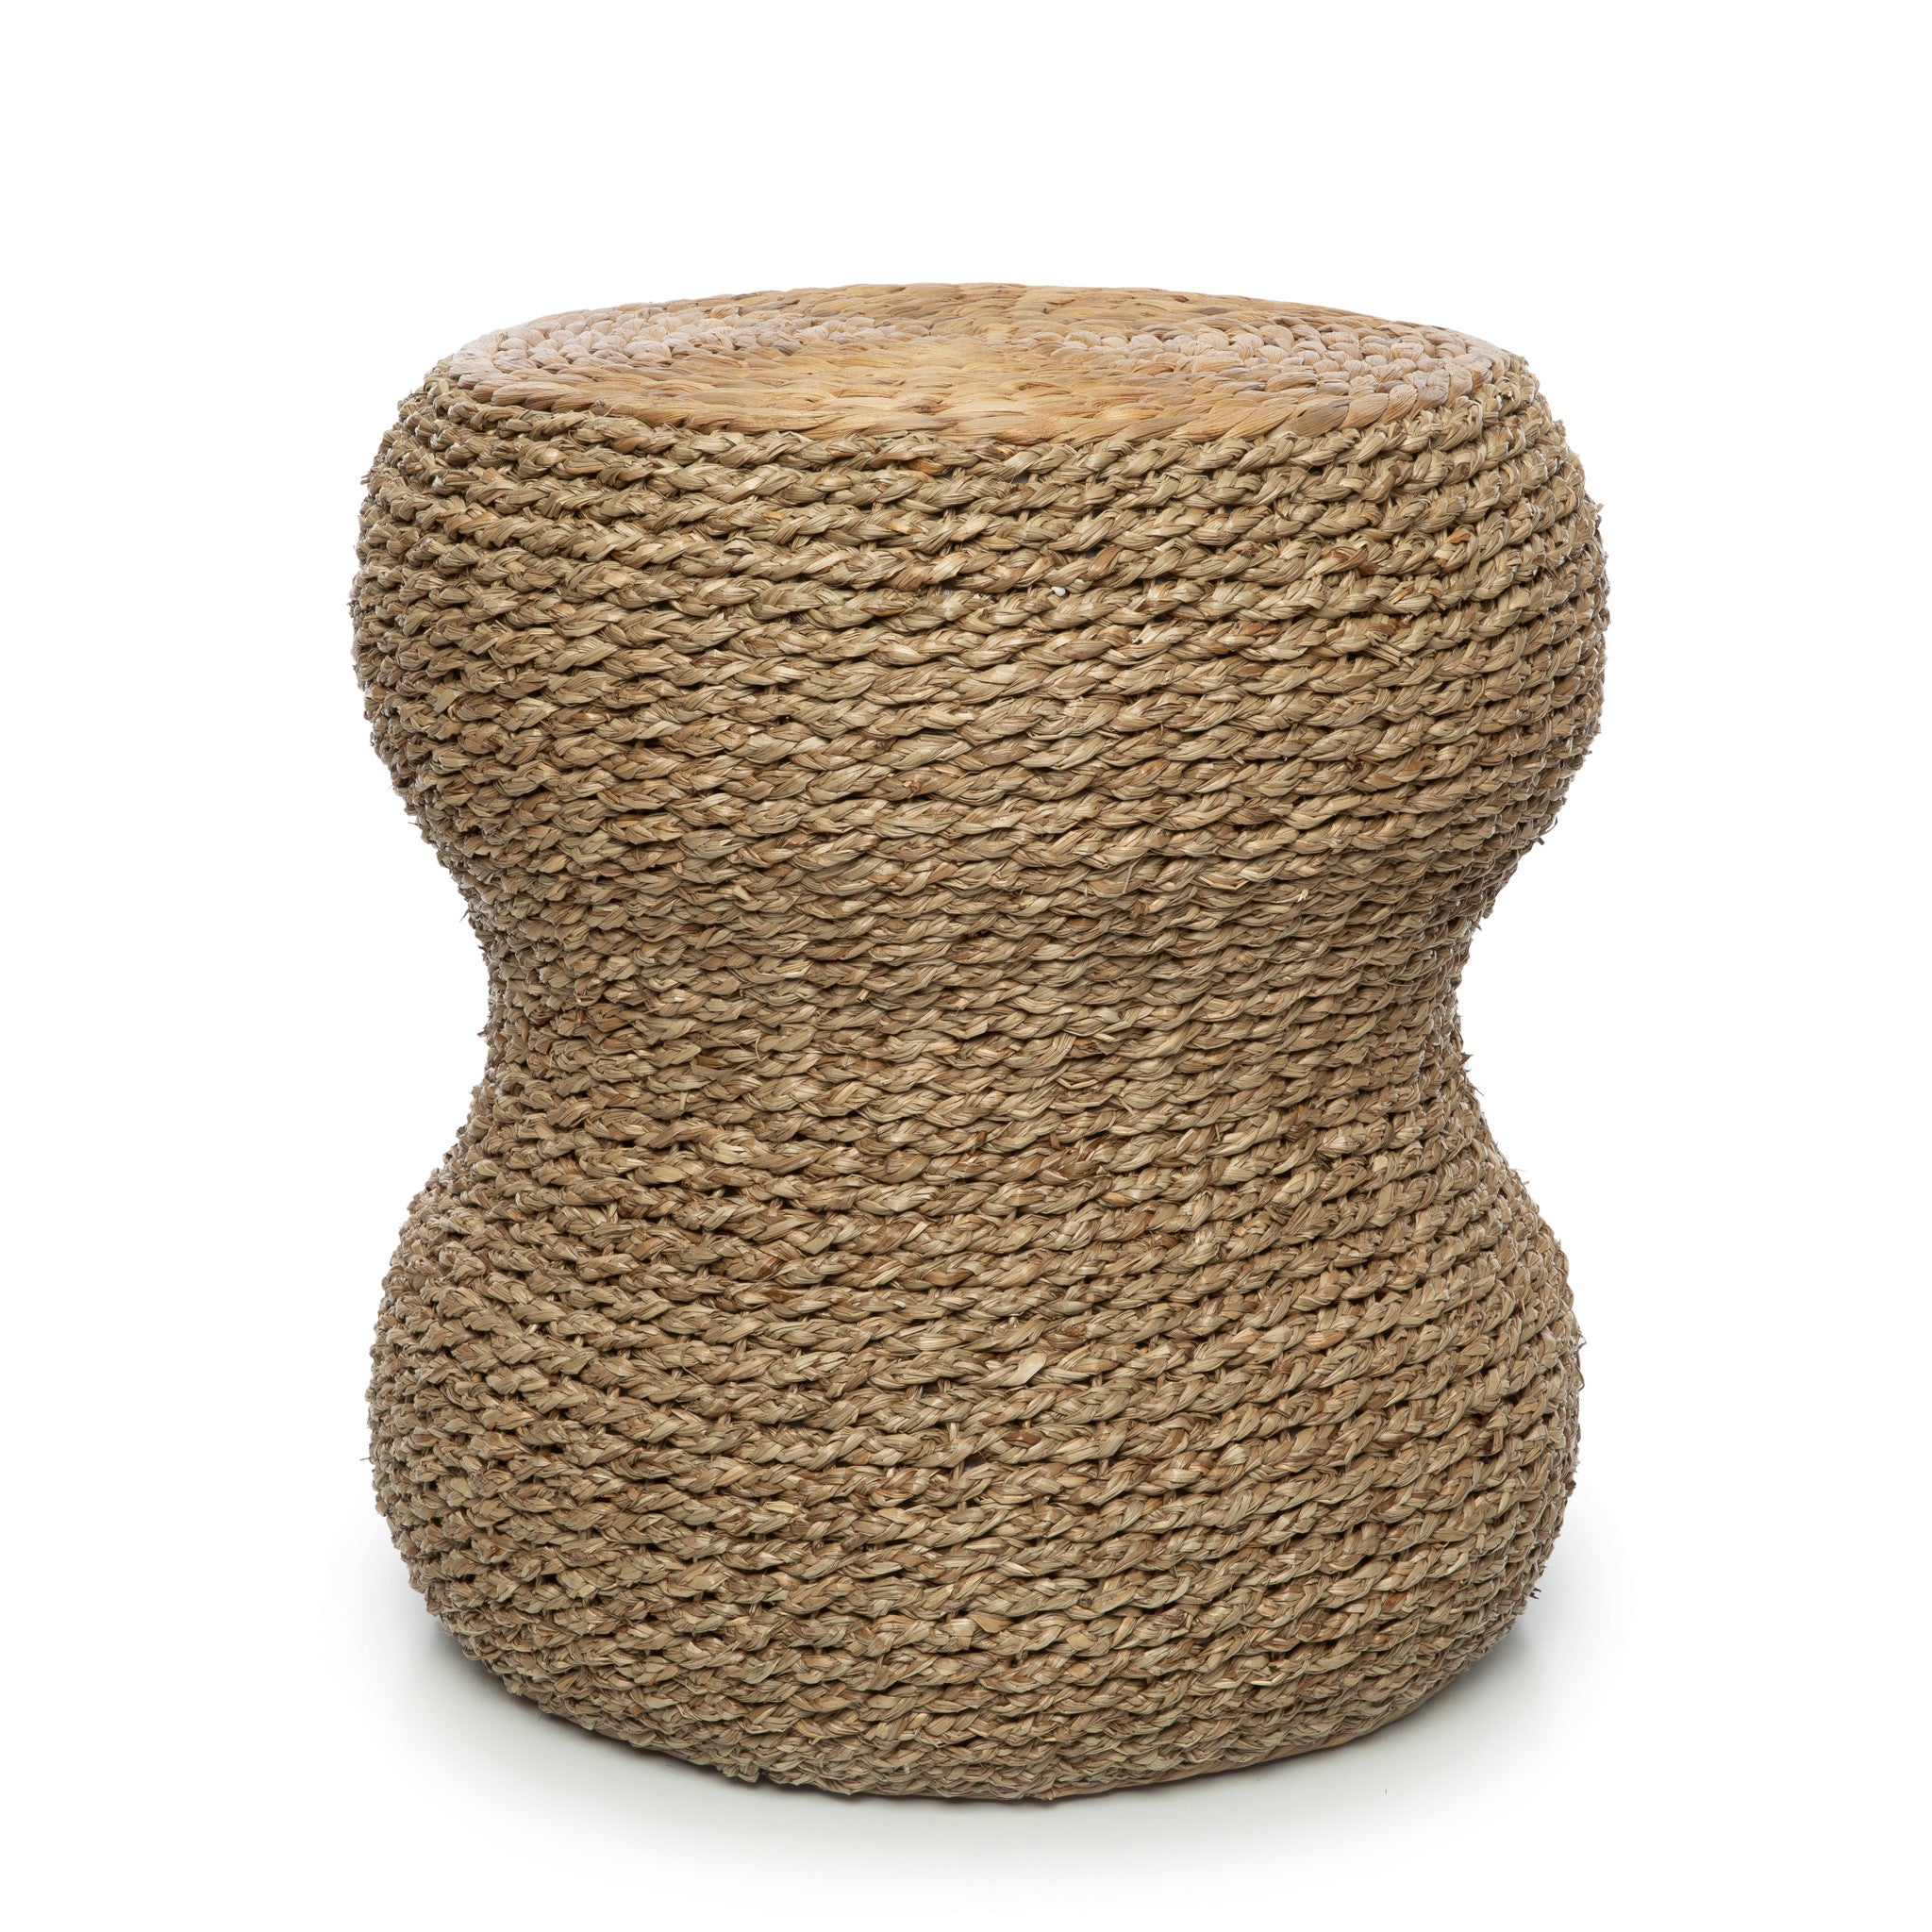 THE SEAGRASS Stool Natural front view